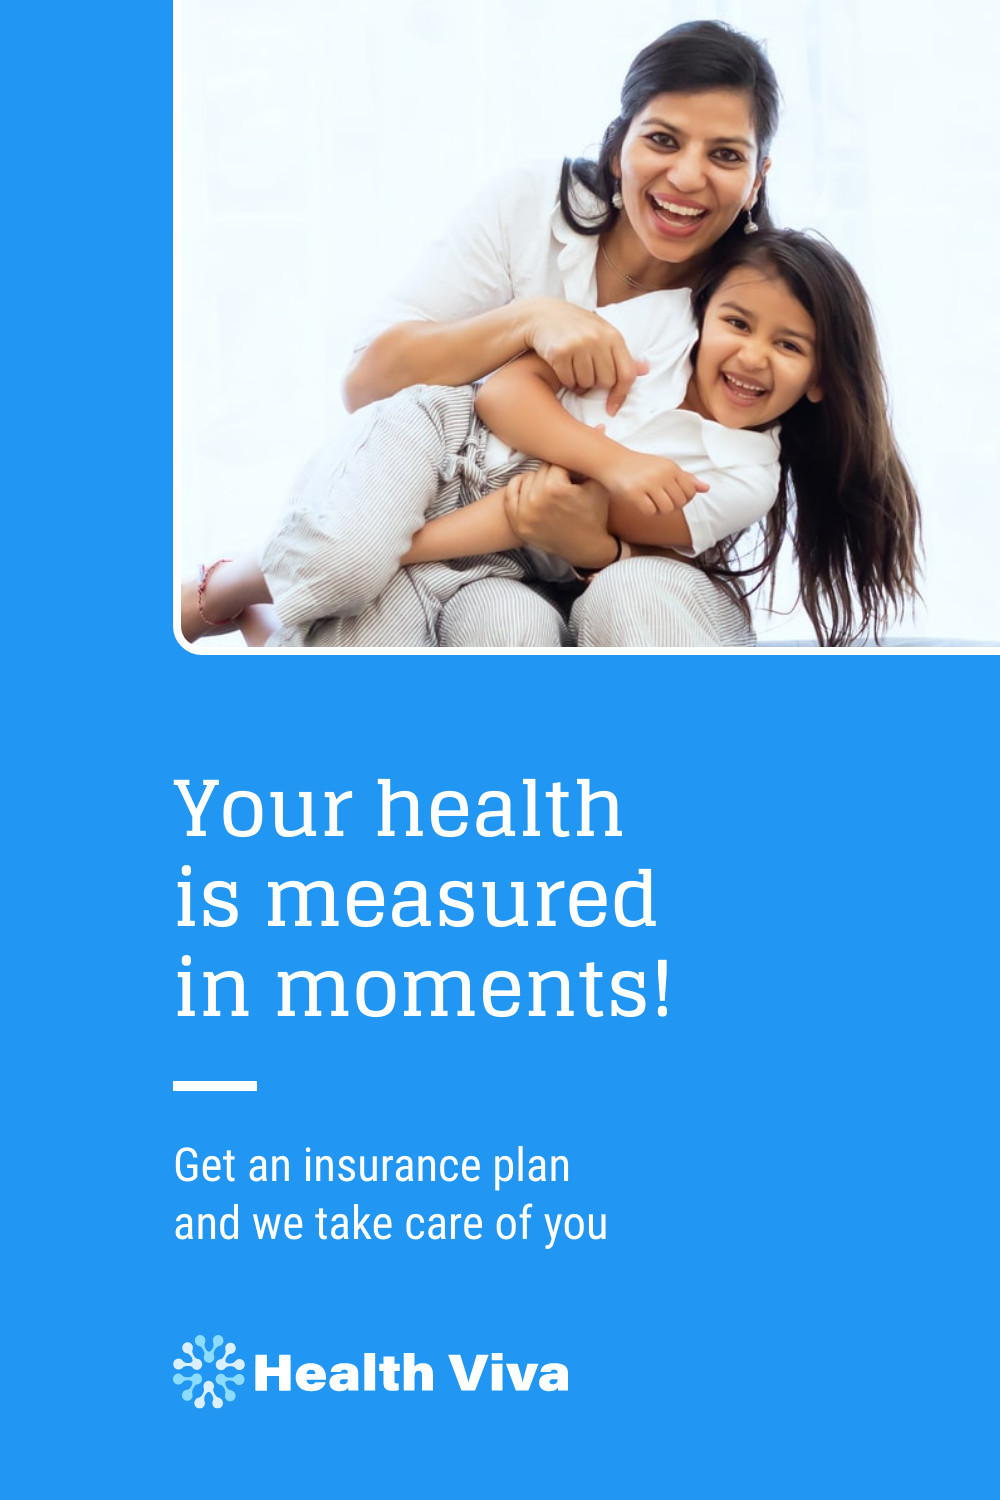 Health Measured In Moments Inline Rectangle 300x250